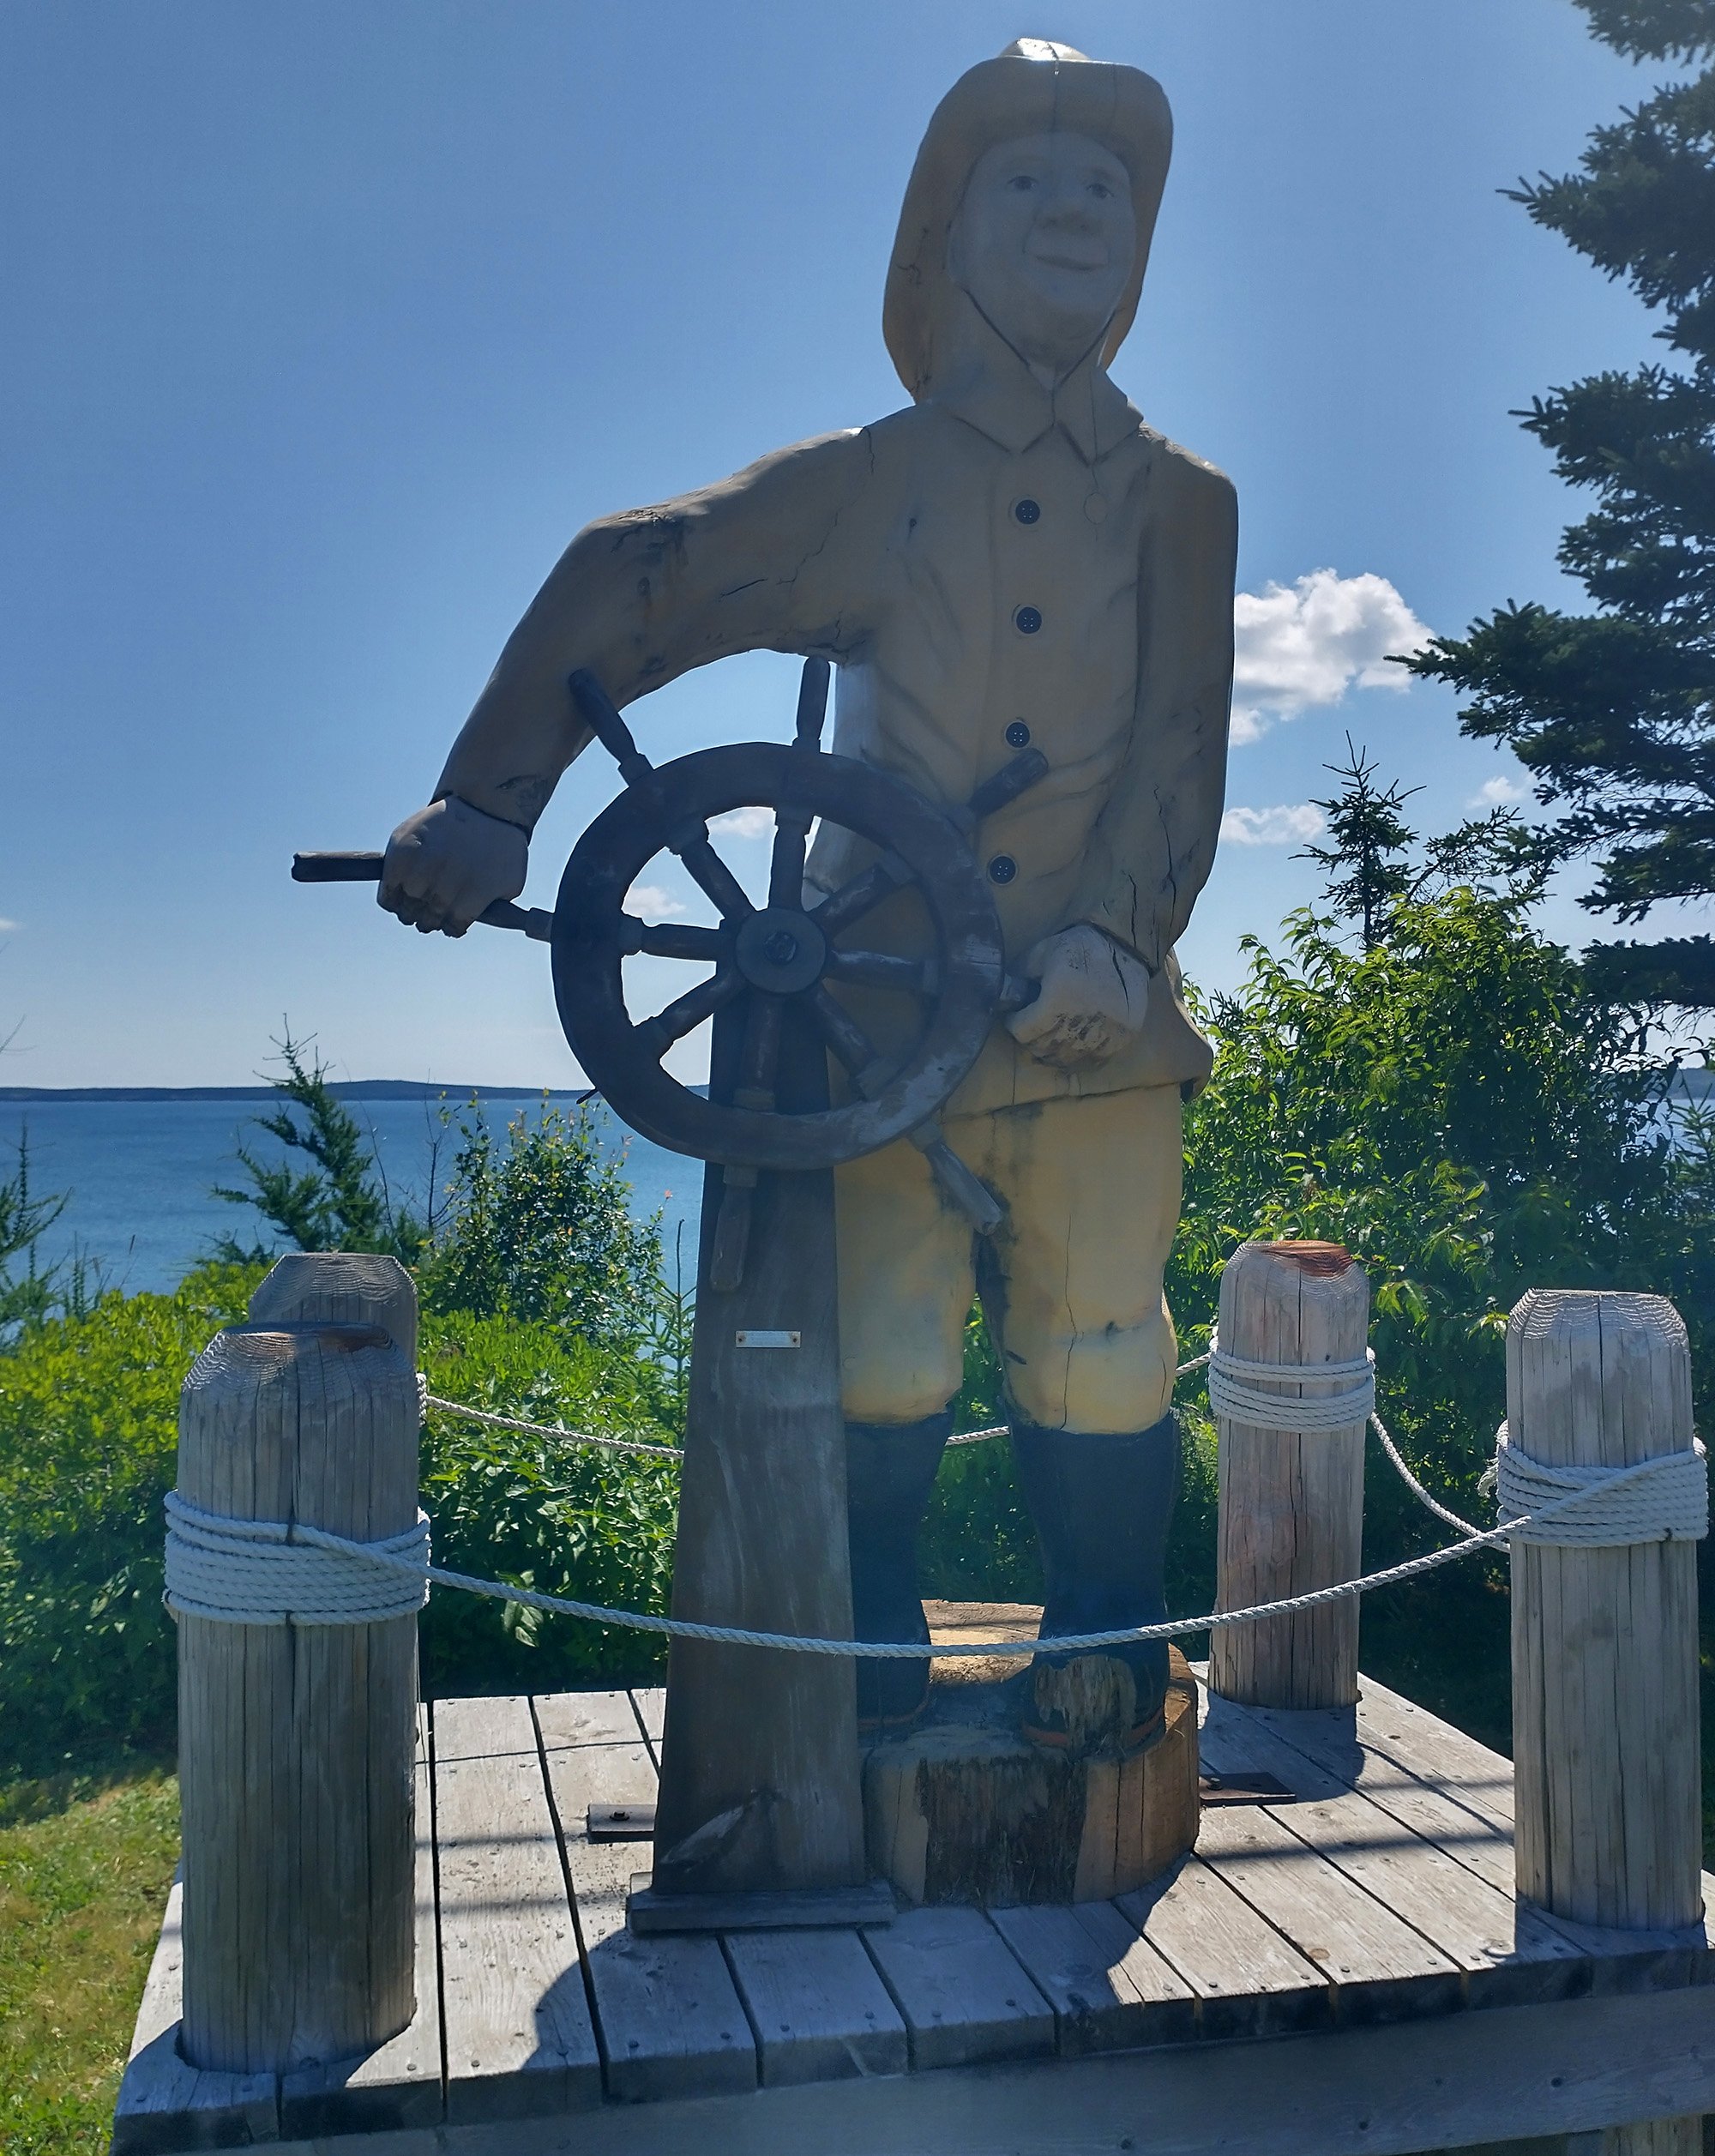 Another thing you see a lot in the Maritimes are these fisherman statues. Don't know the meaning of them, if any.